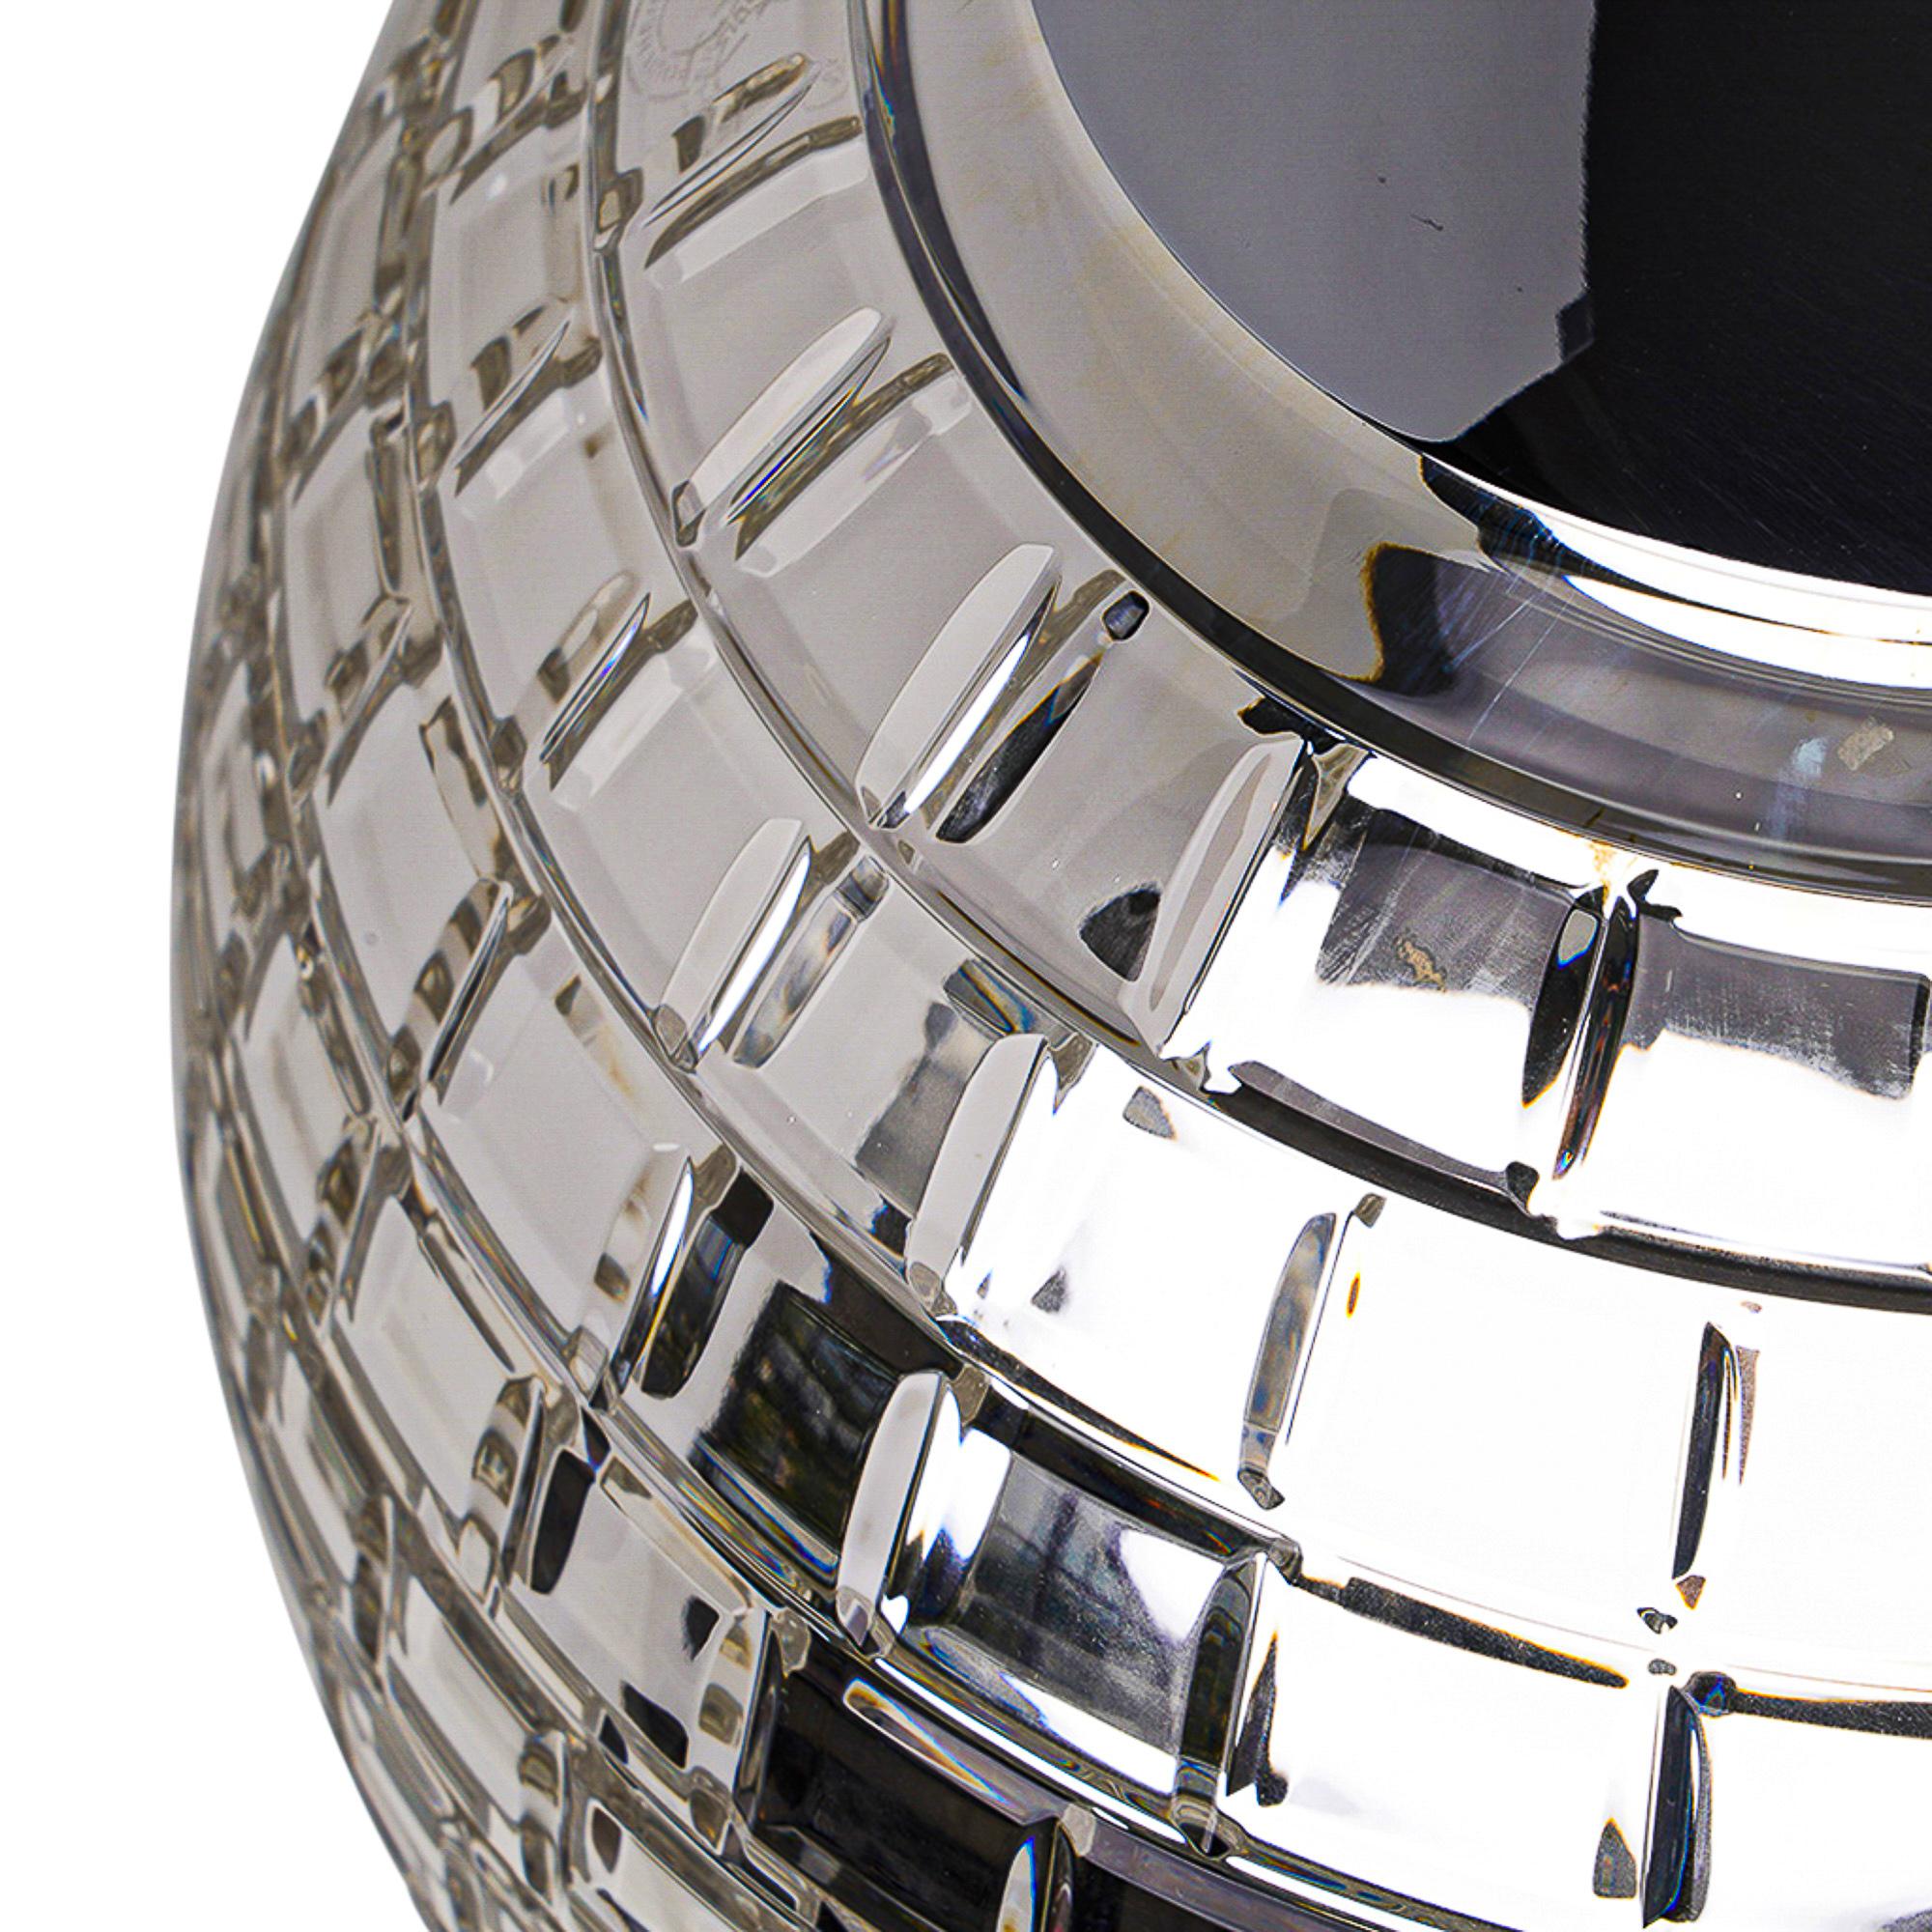 Mightychic offers a limited edition Hermes Disco Ball is a collaboration with Saint - Louis and is 